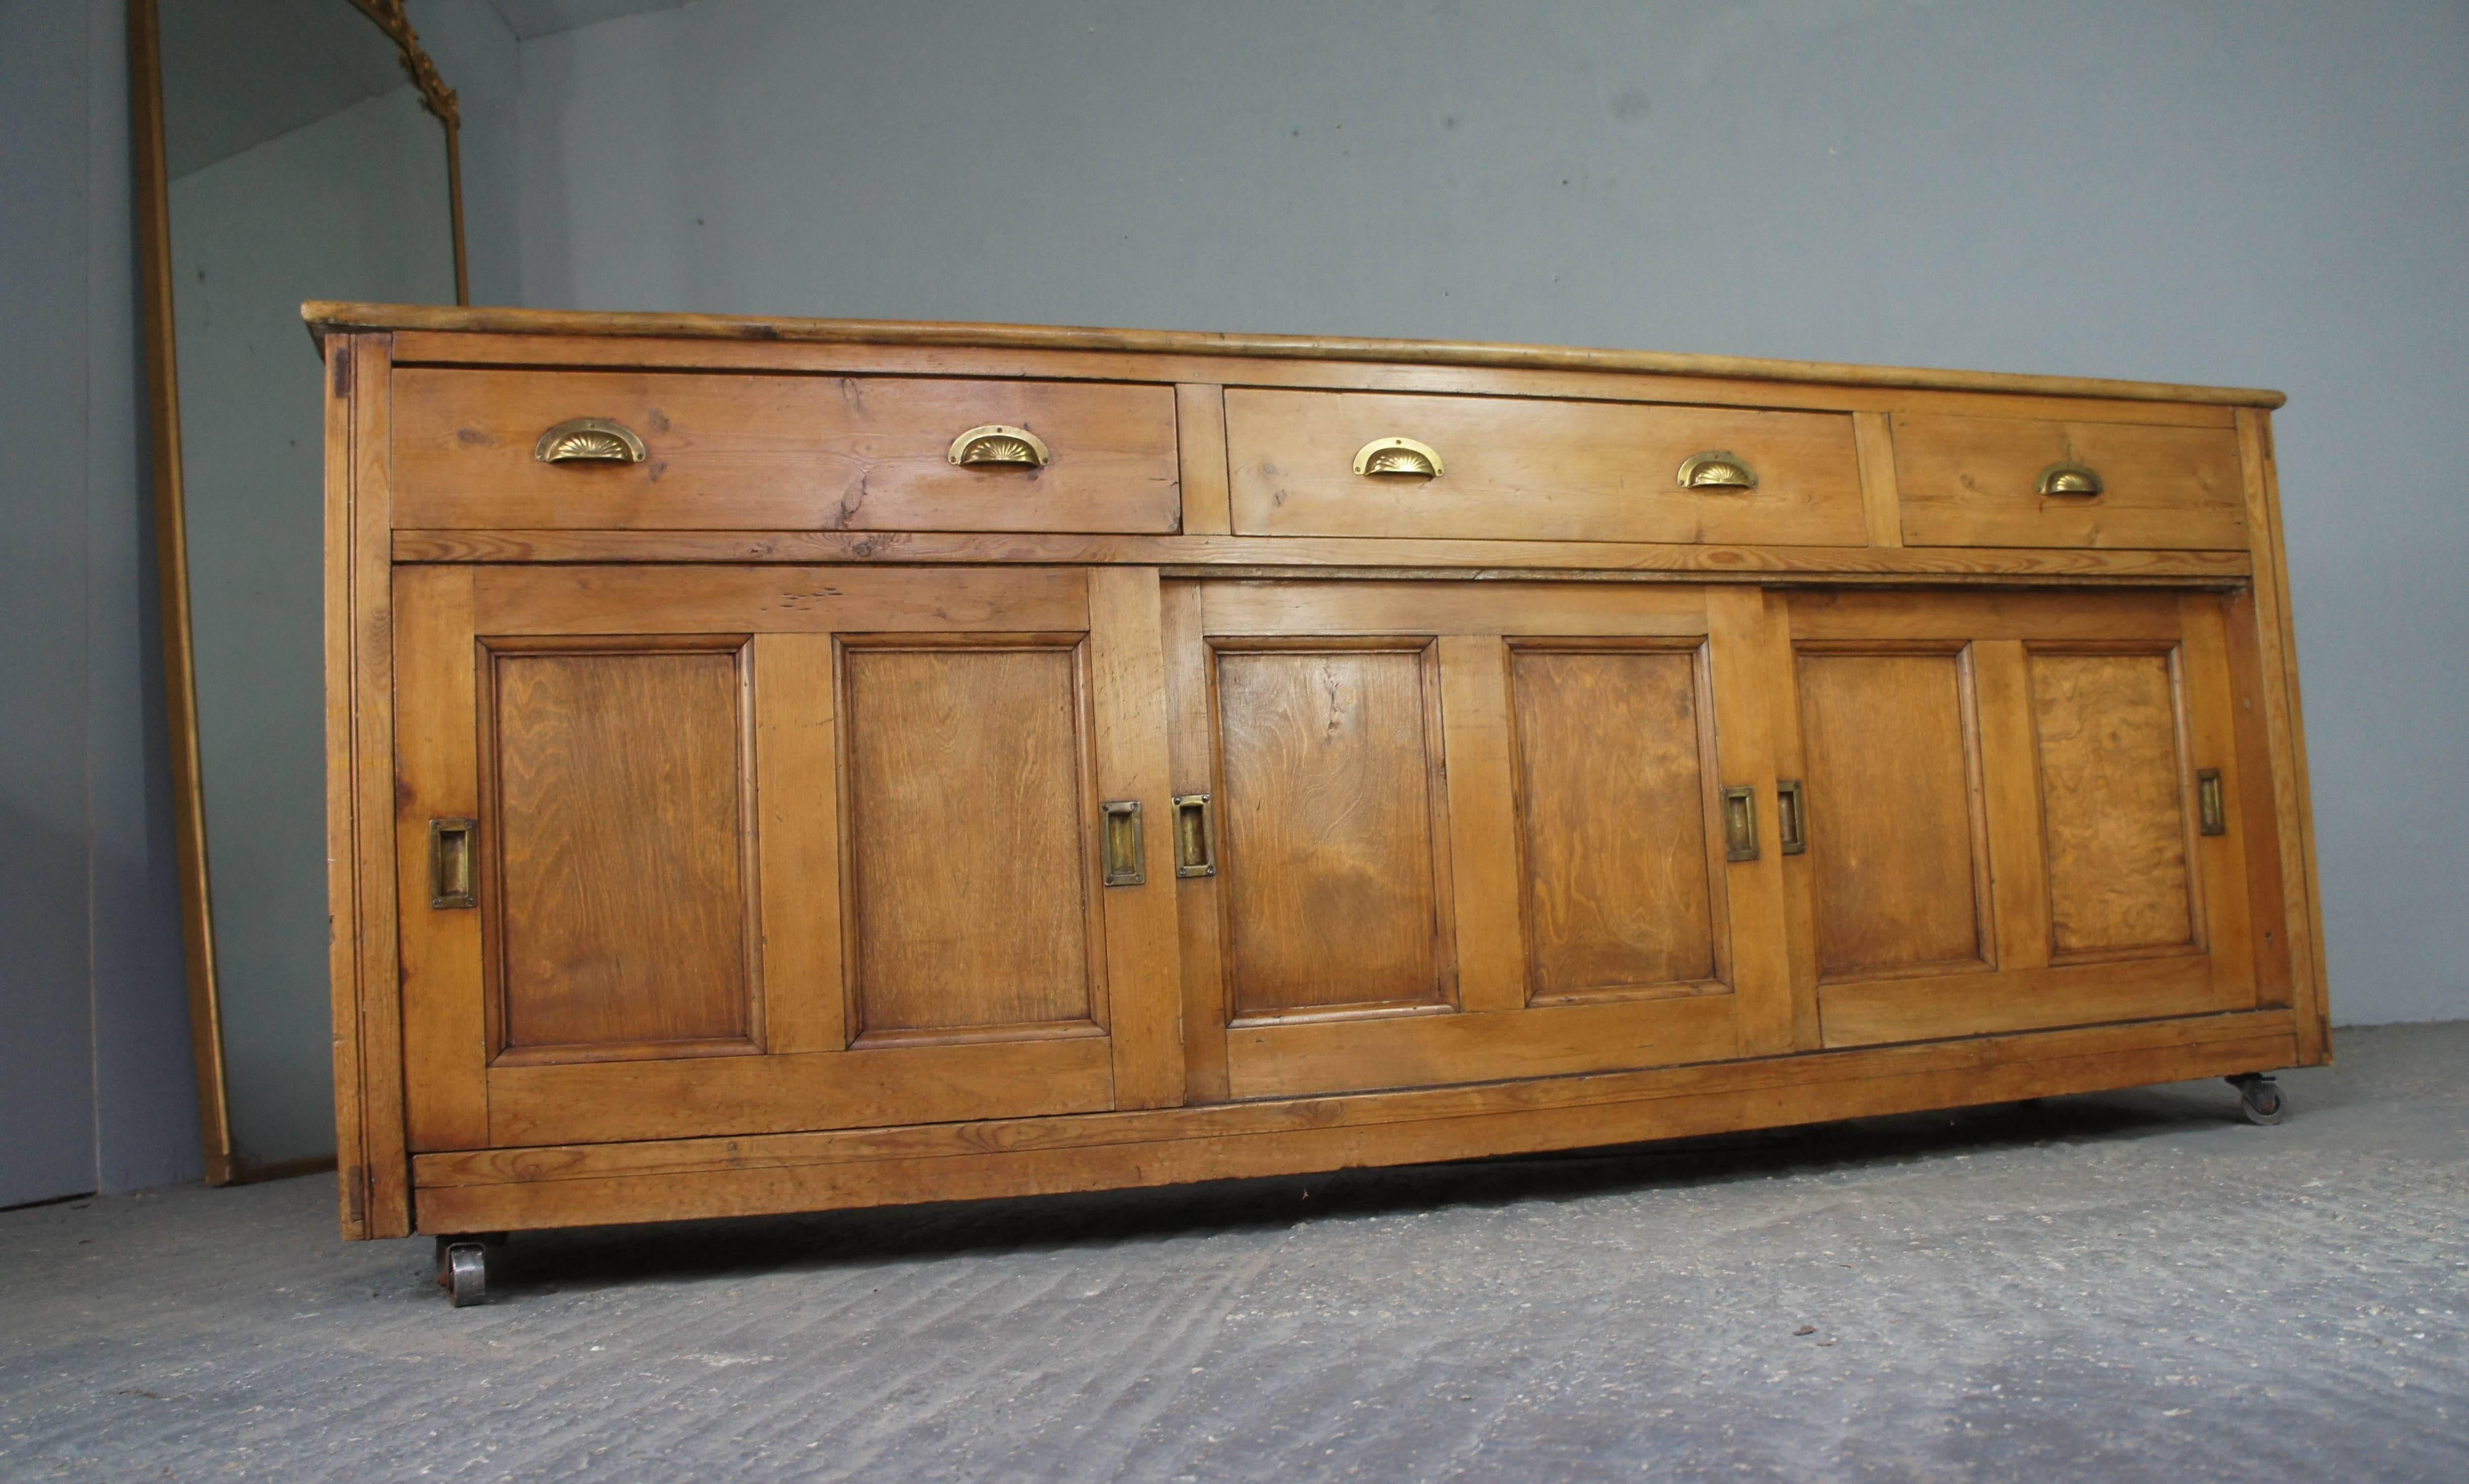 Beautiful Victorian pine dresser base with hardwood top, featuring two drawers and one false drawer on right hand side. Below the drawers are three sliding doors which reveal plenty of storage options; shelves to the middle and left hand side and an